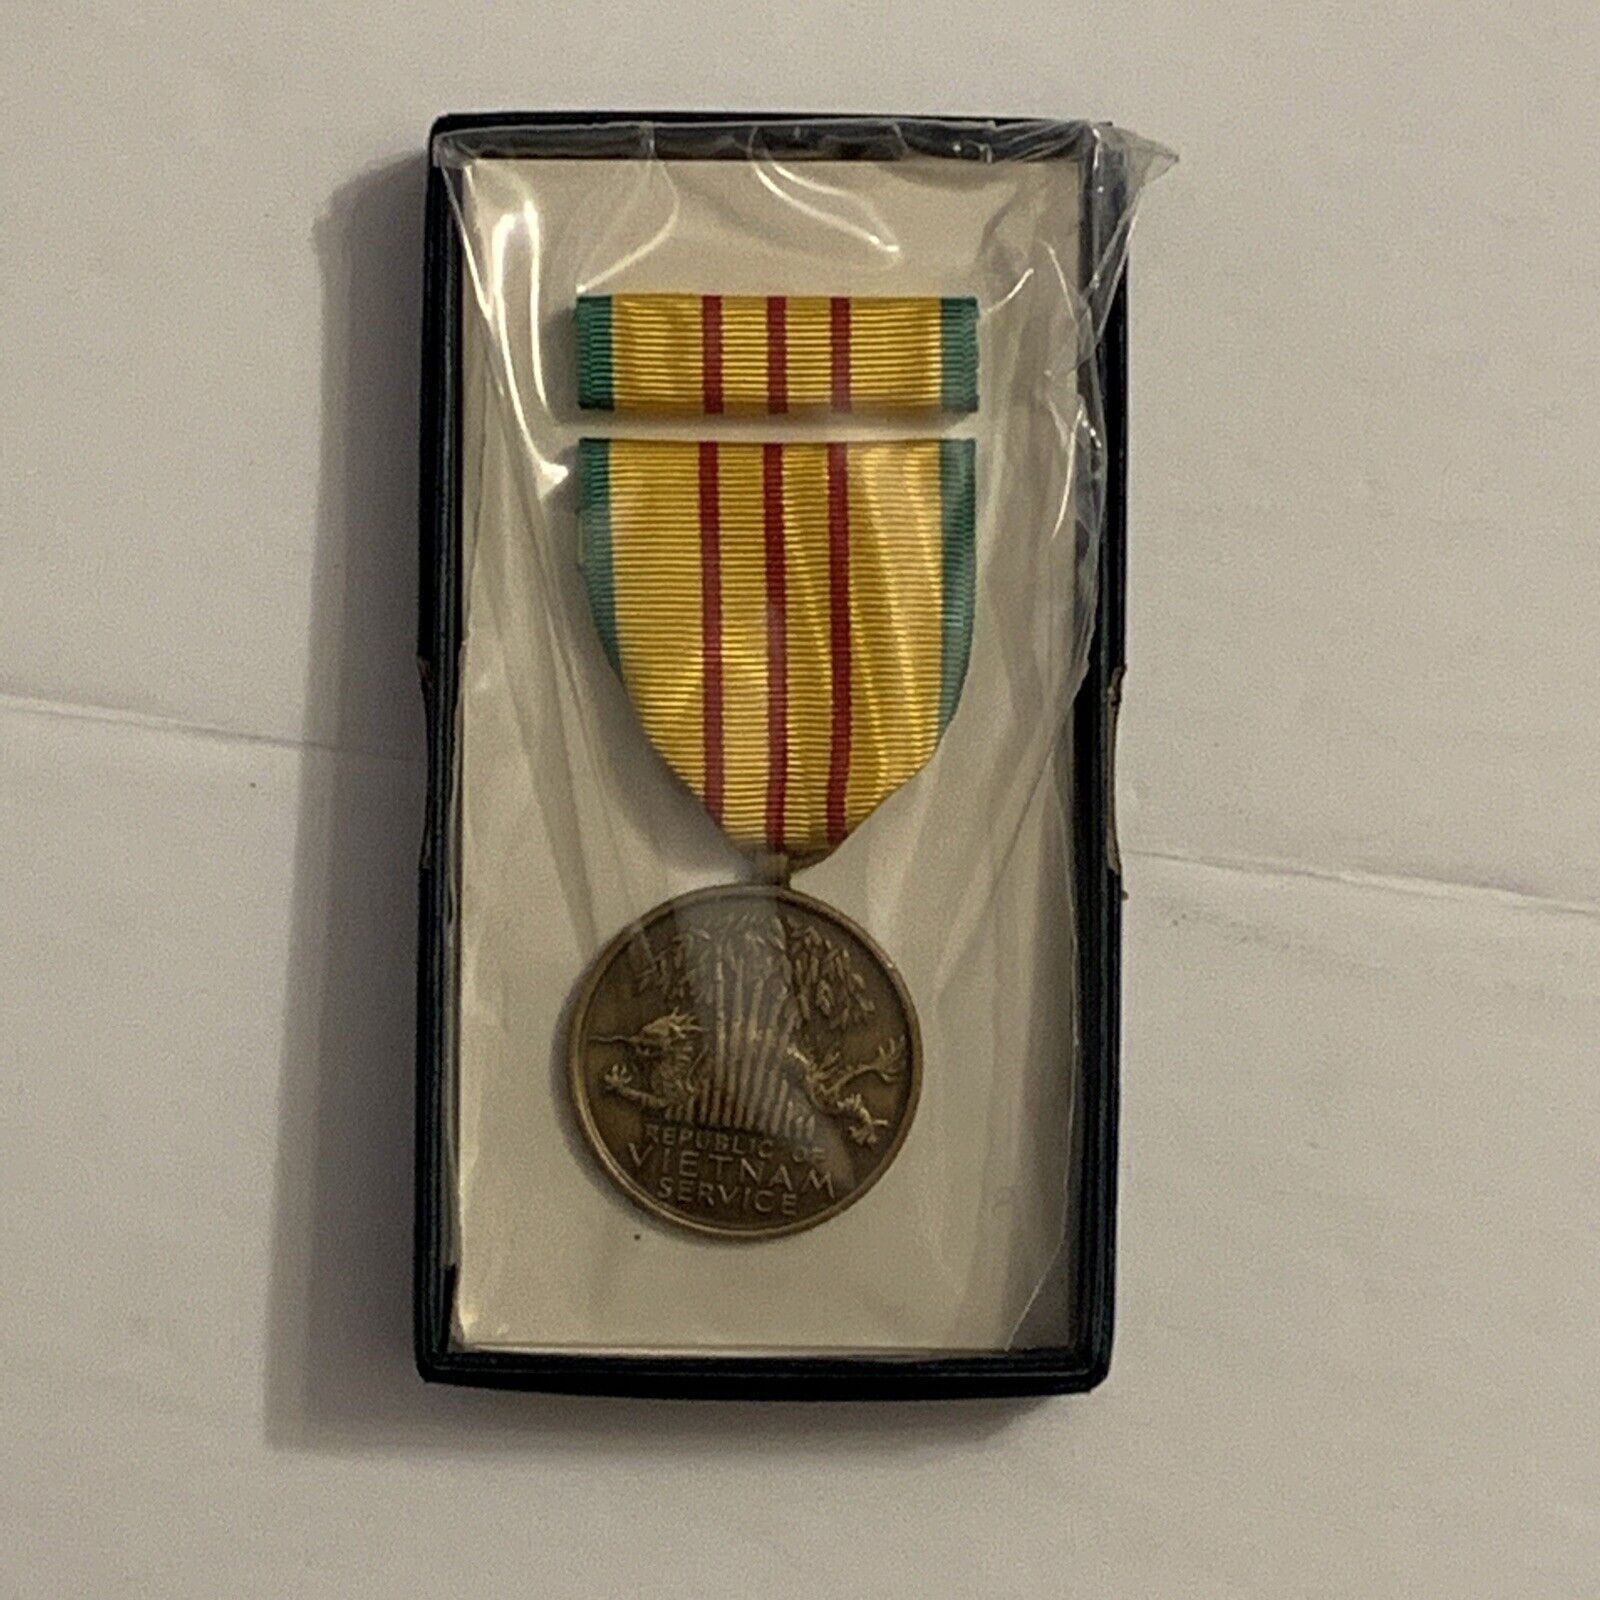 NEW-ORIGINAL-VIETNAM SERVICE MEDAL SET-, IN MILITARY-GI- ISSUE BOX- Dated 1969